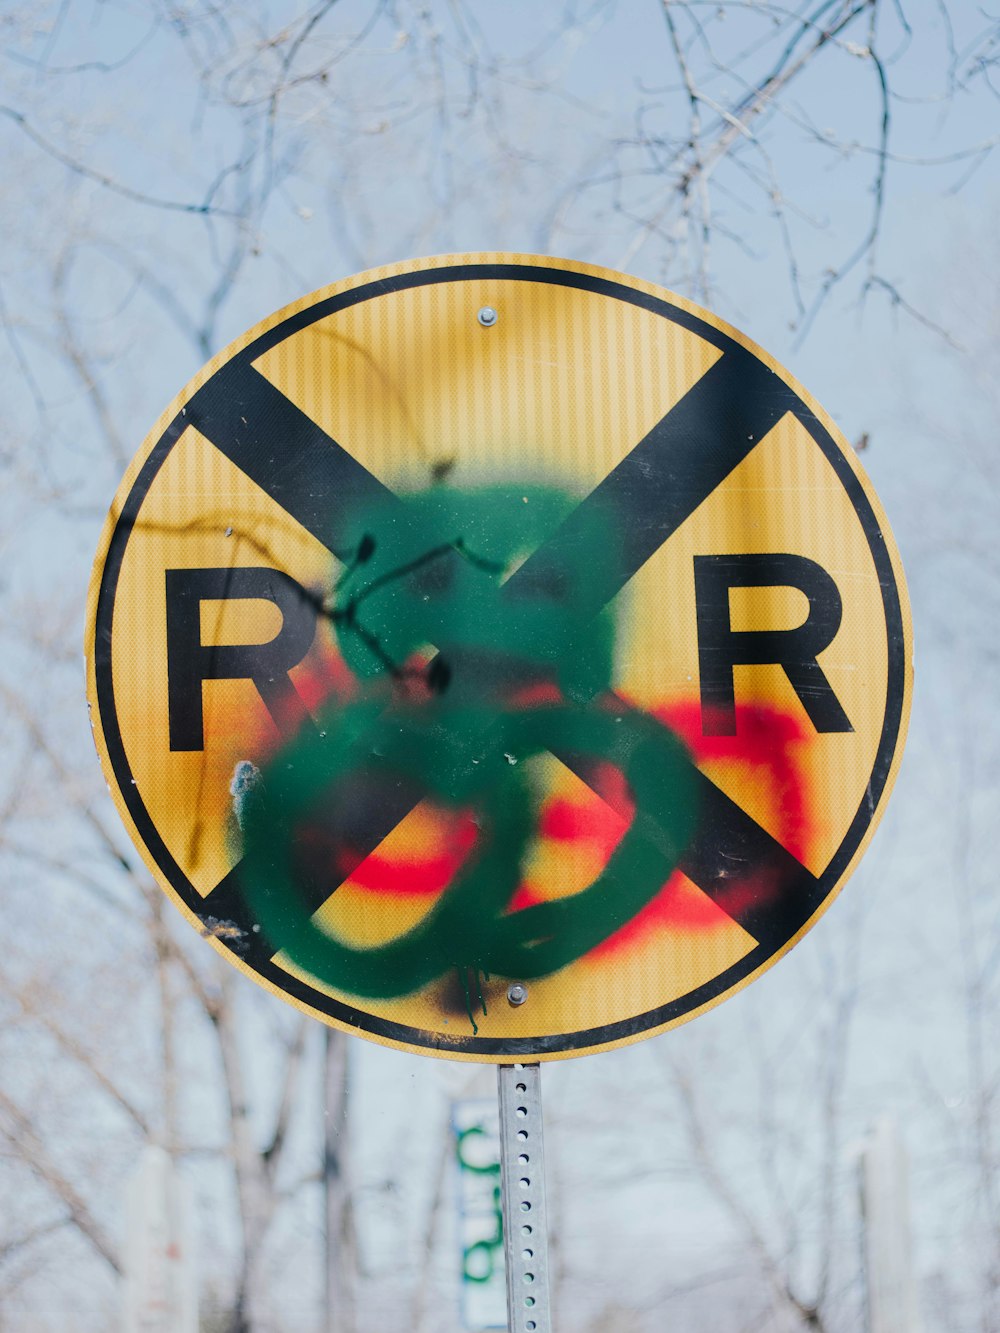 a street sign that has been spray painted